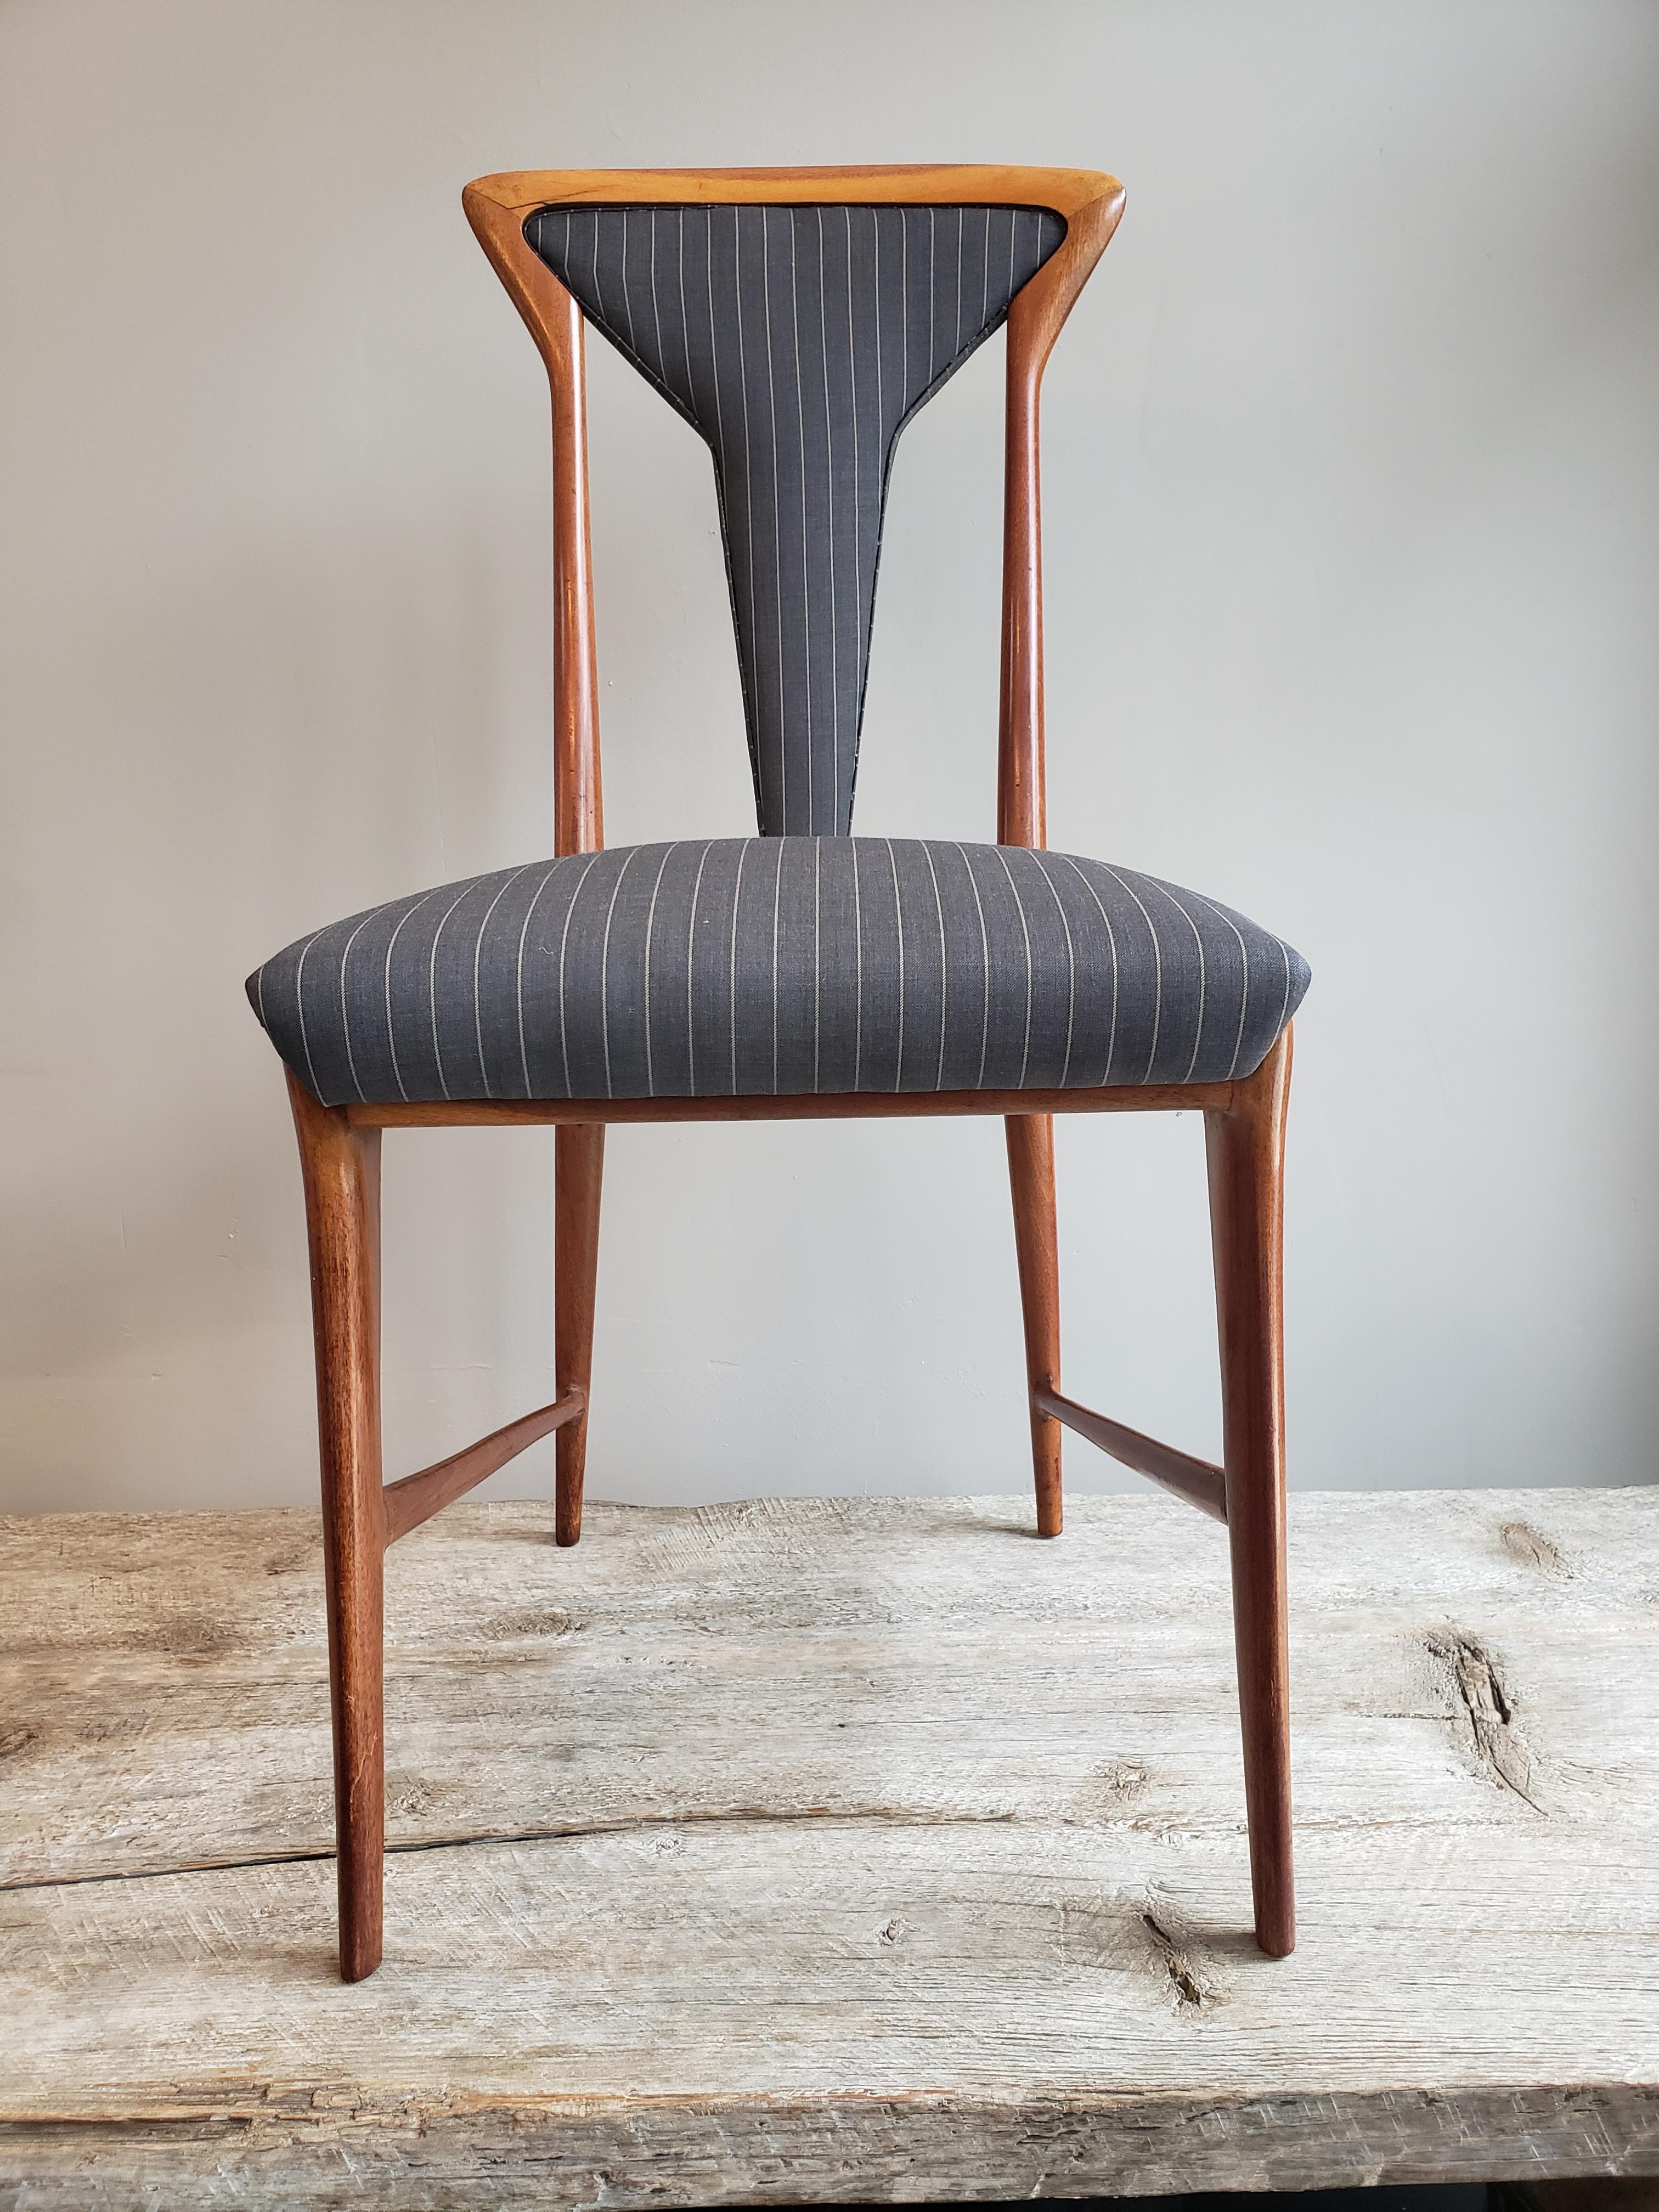 A set of 6 Mid-Century Modern upholstered dining chairs from Italy and designed by Carlo De Carli. Made out of walnut wood and upholstered in a sophisticated masculine gray and white pin striped fabric. Circa 1950's.